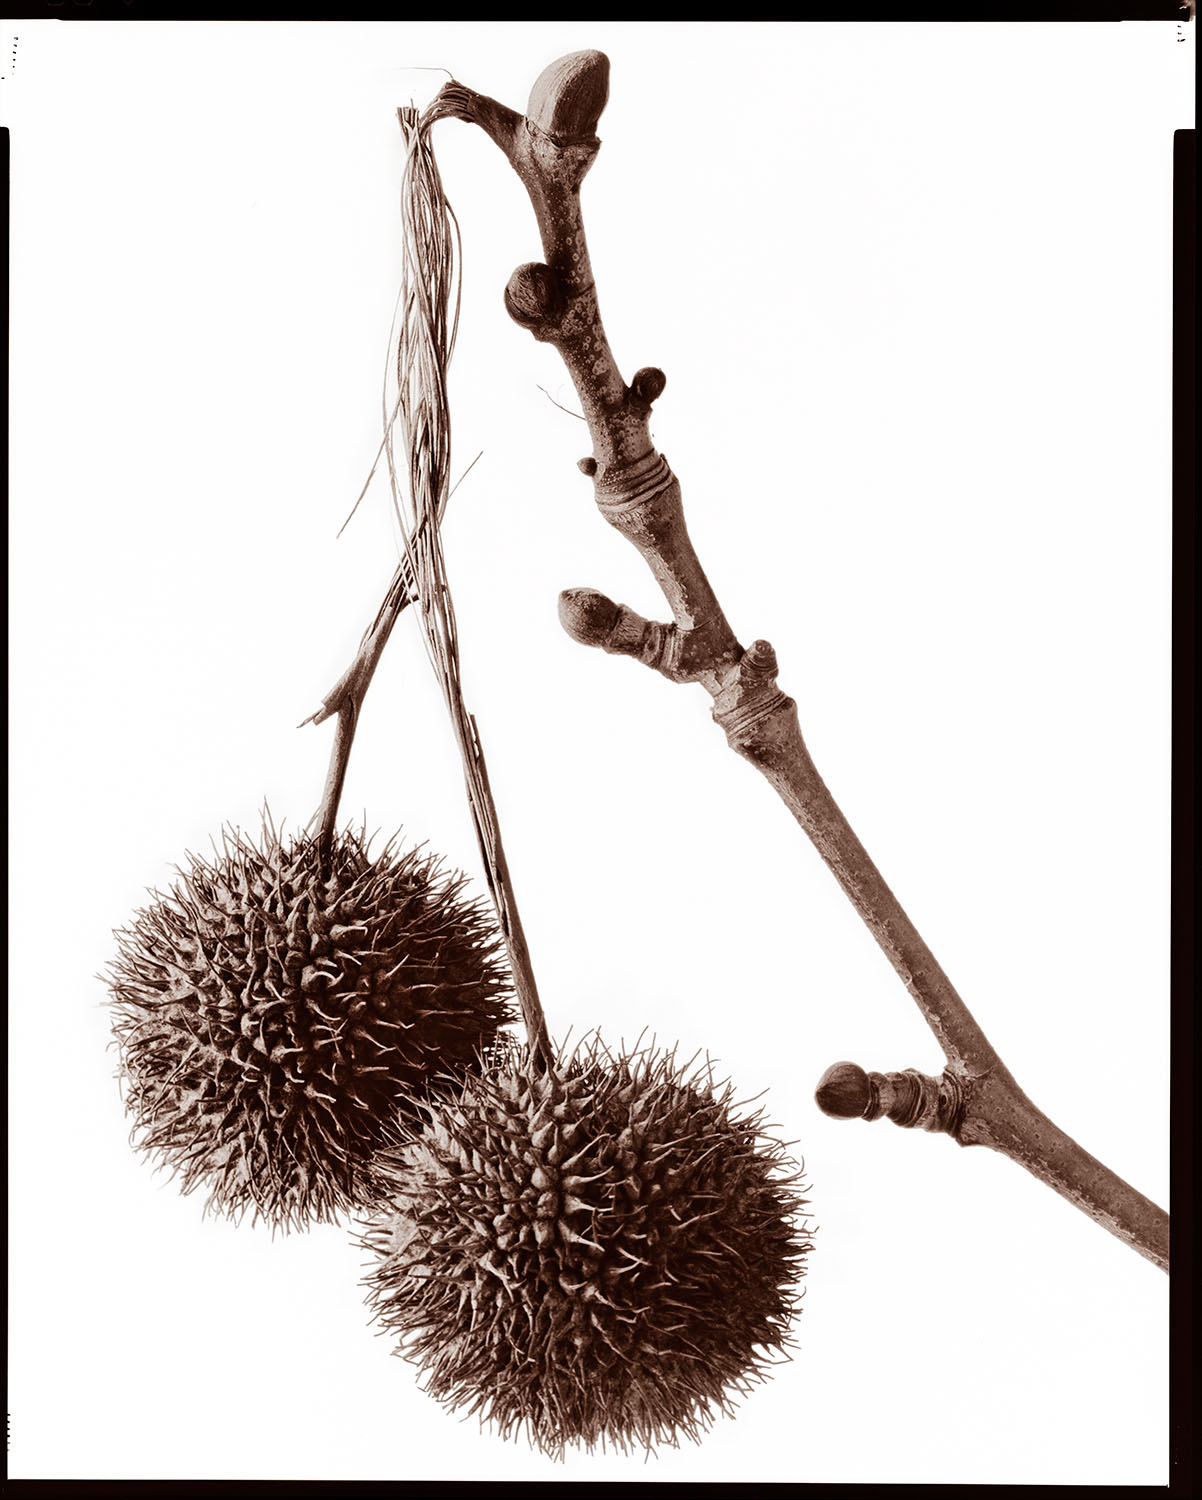 London Plane Seed Pods